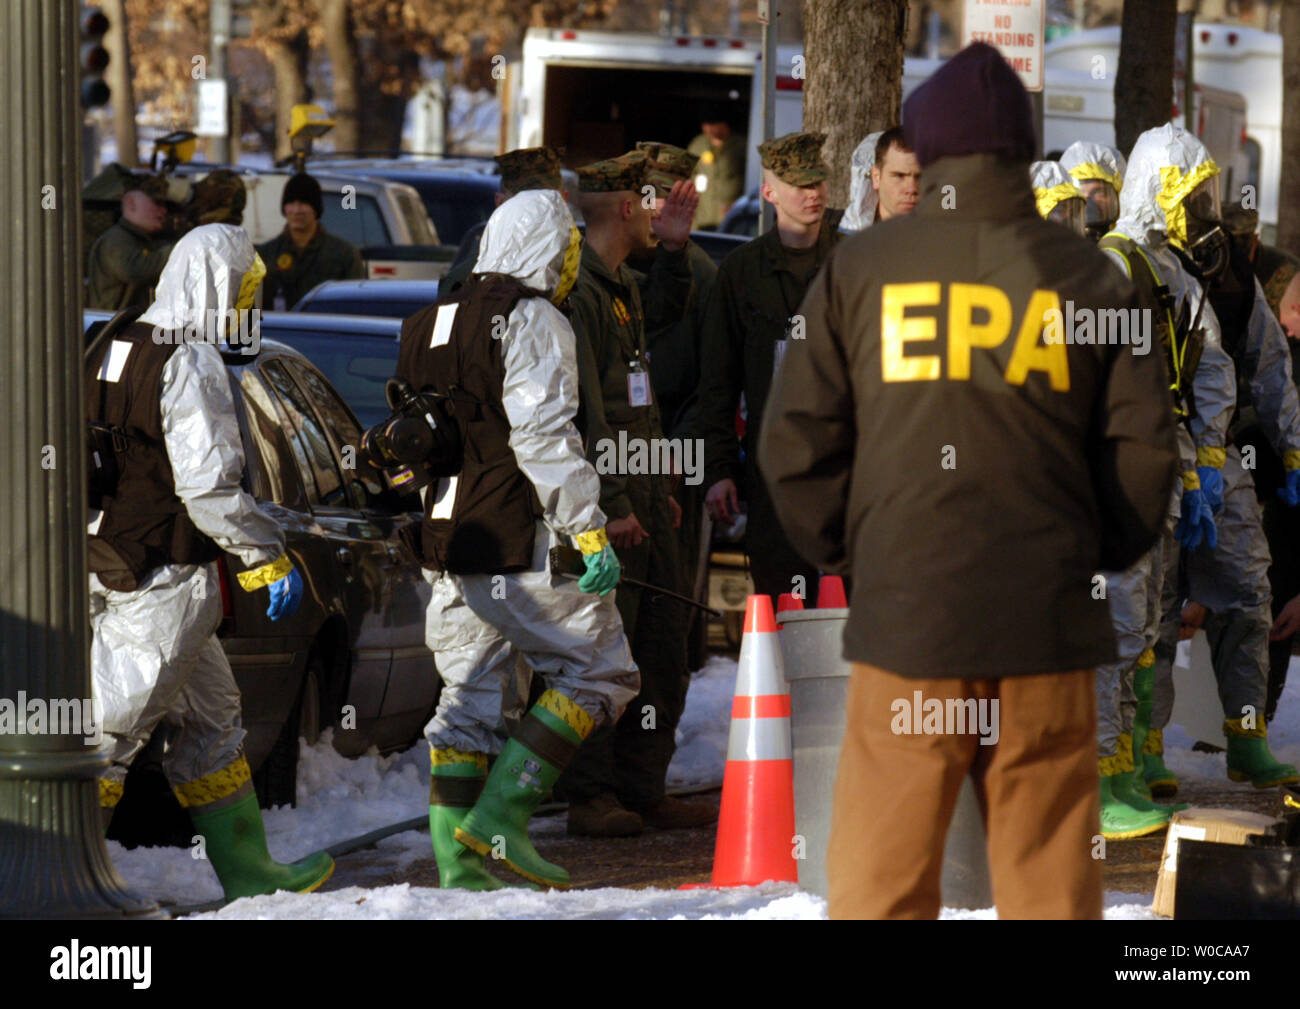 Marines from the 4th MEB (AT) march into the Russell office building as EPA officials look on, on February 4, 2004 in Washington.  Three senate office buildings are being sanitized after ricin was discovered two days earlier in the mail room of Sen. Bill Frist, R-Tenn. (UPI Photo/Michael Kleinfeld) Stock Photo